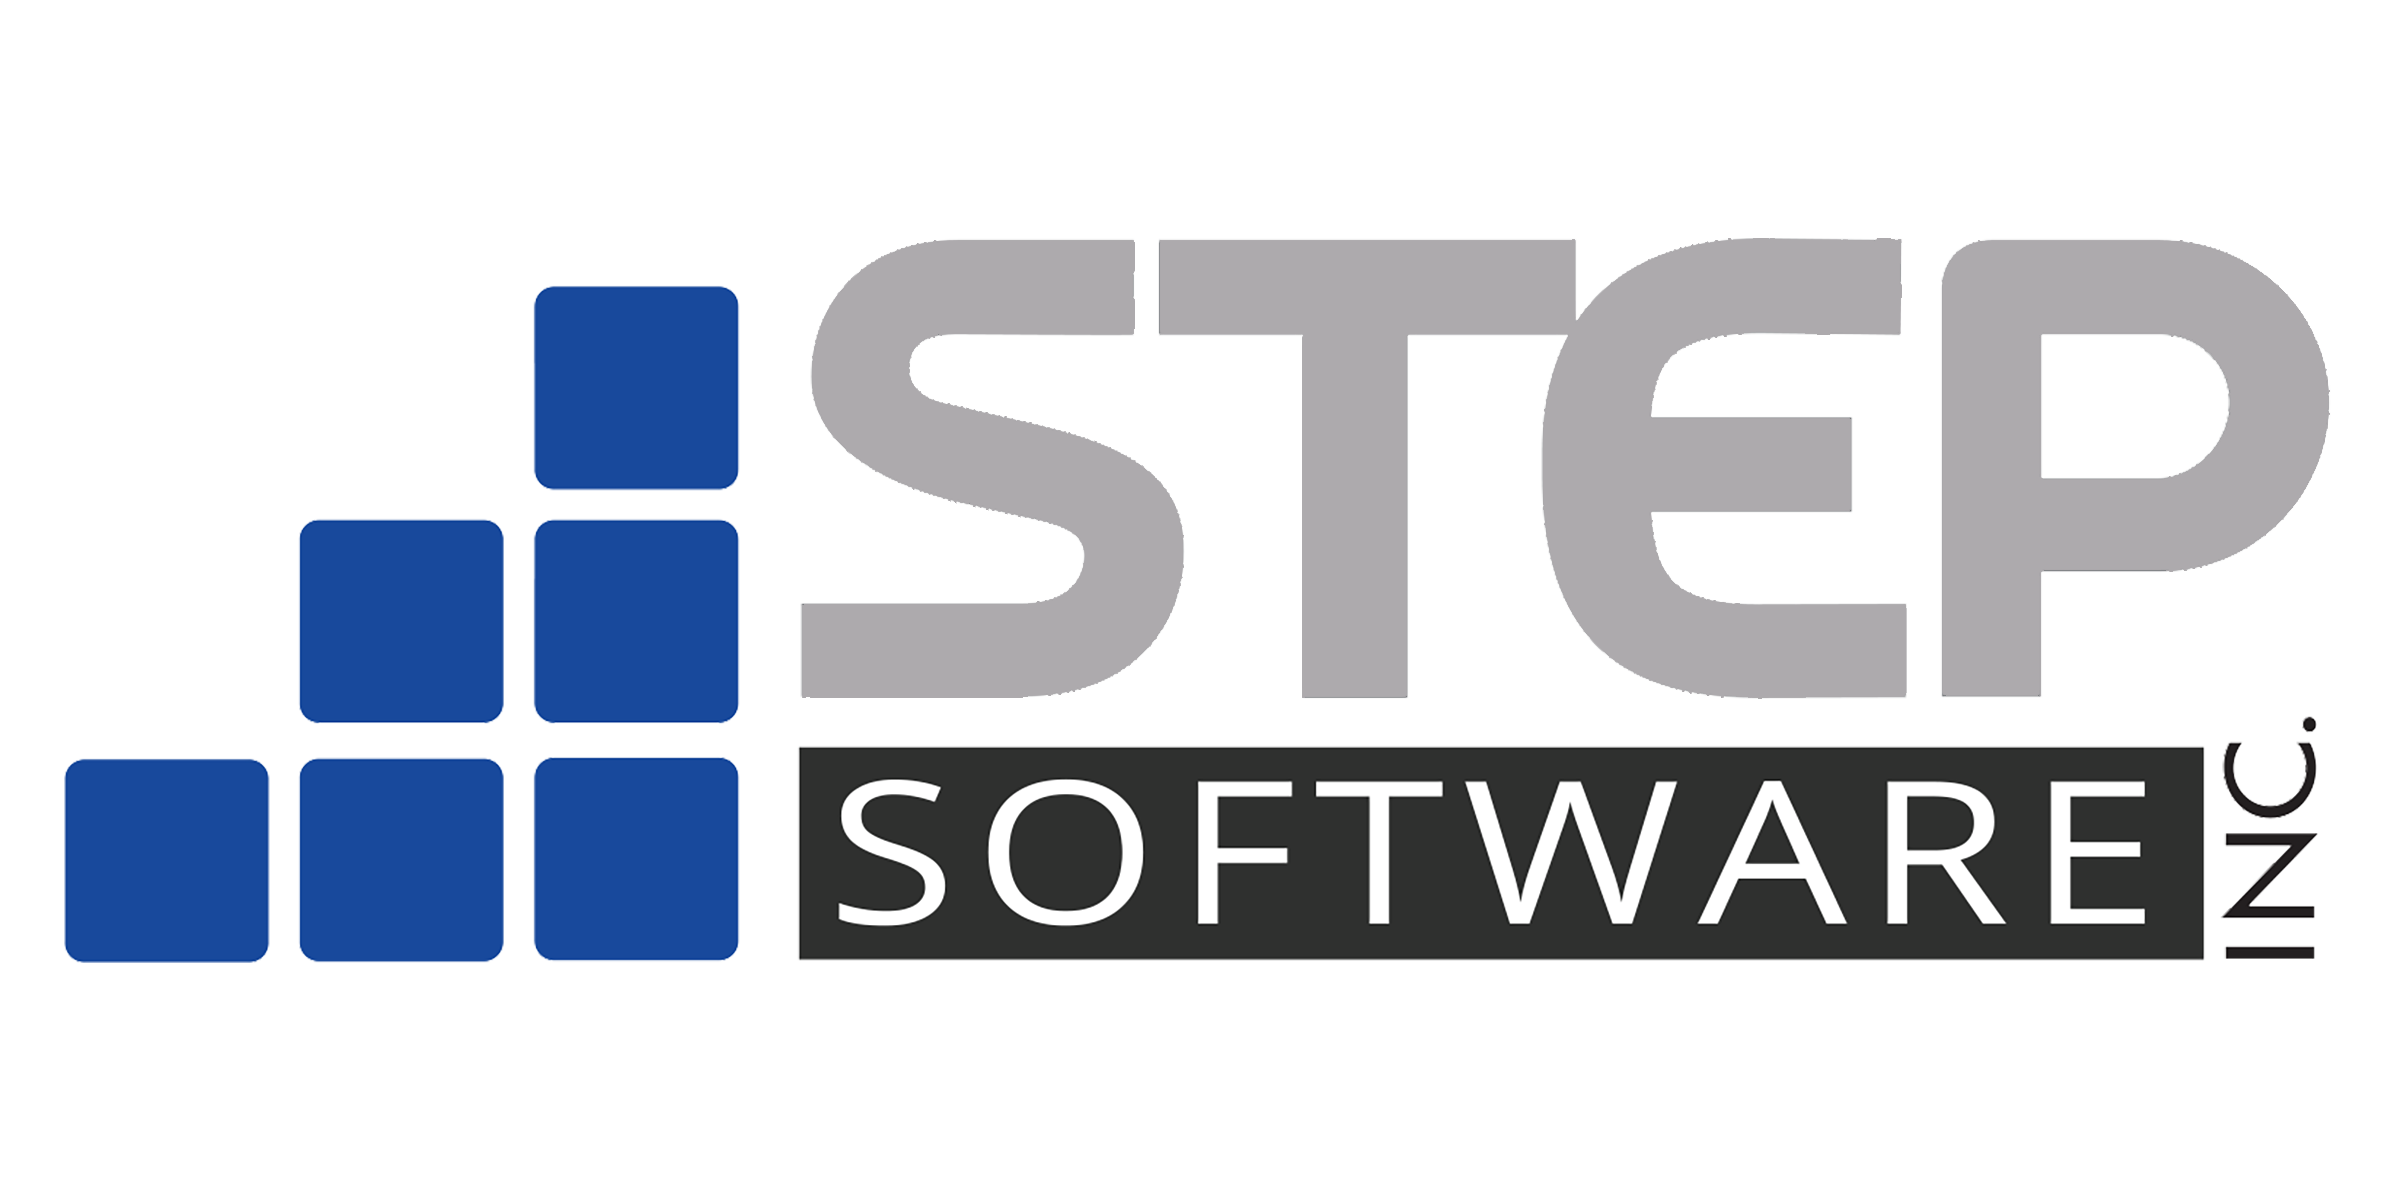 Step Software Inc. profile on Qualified.One